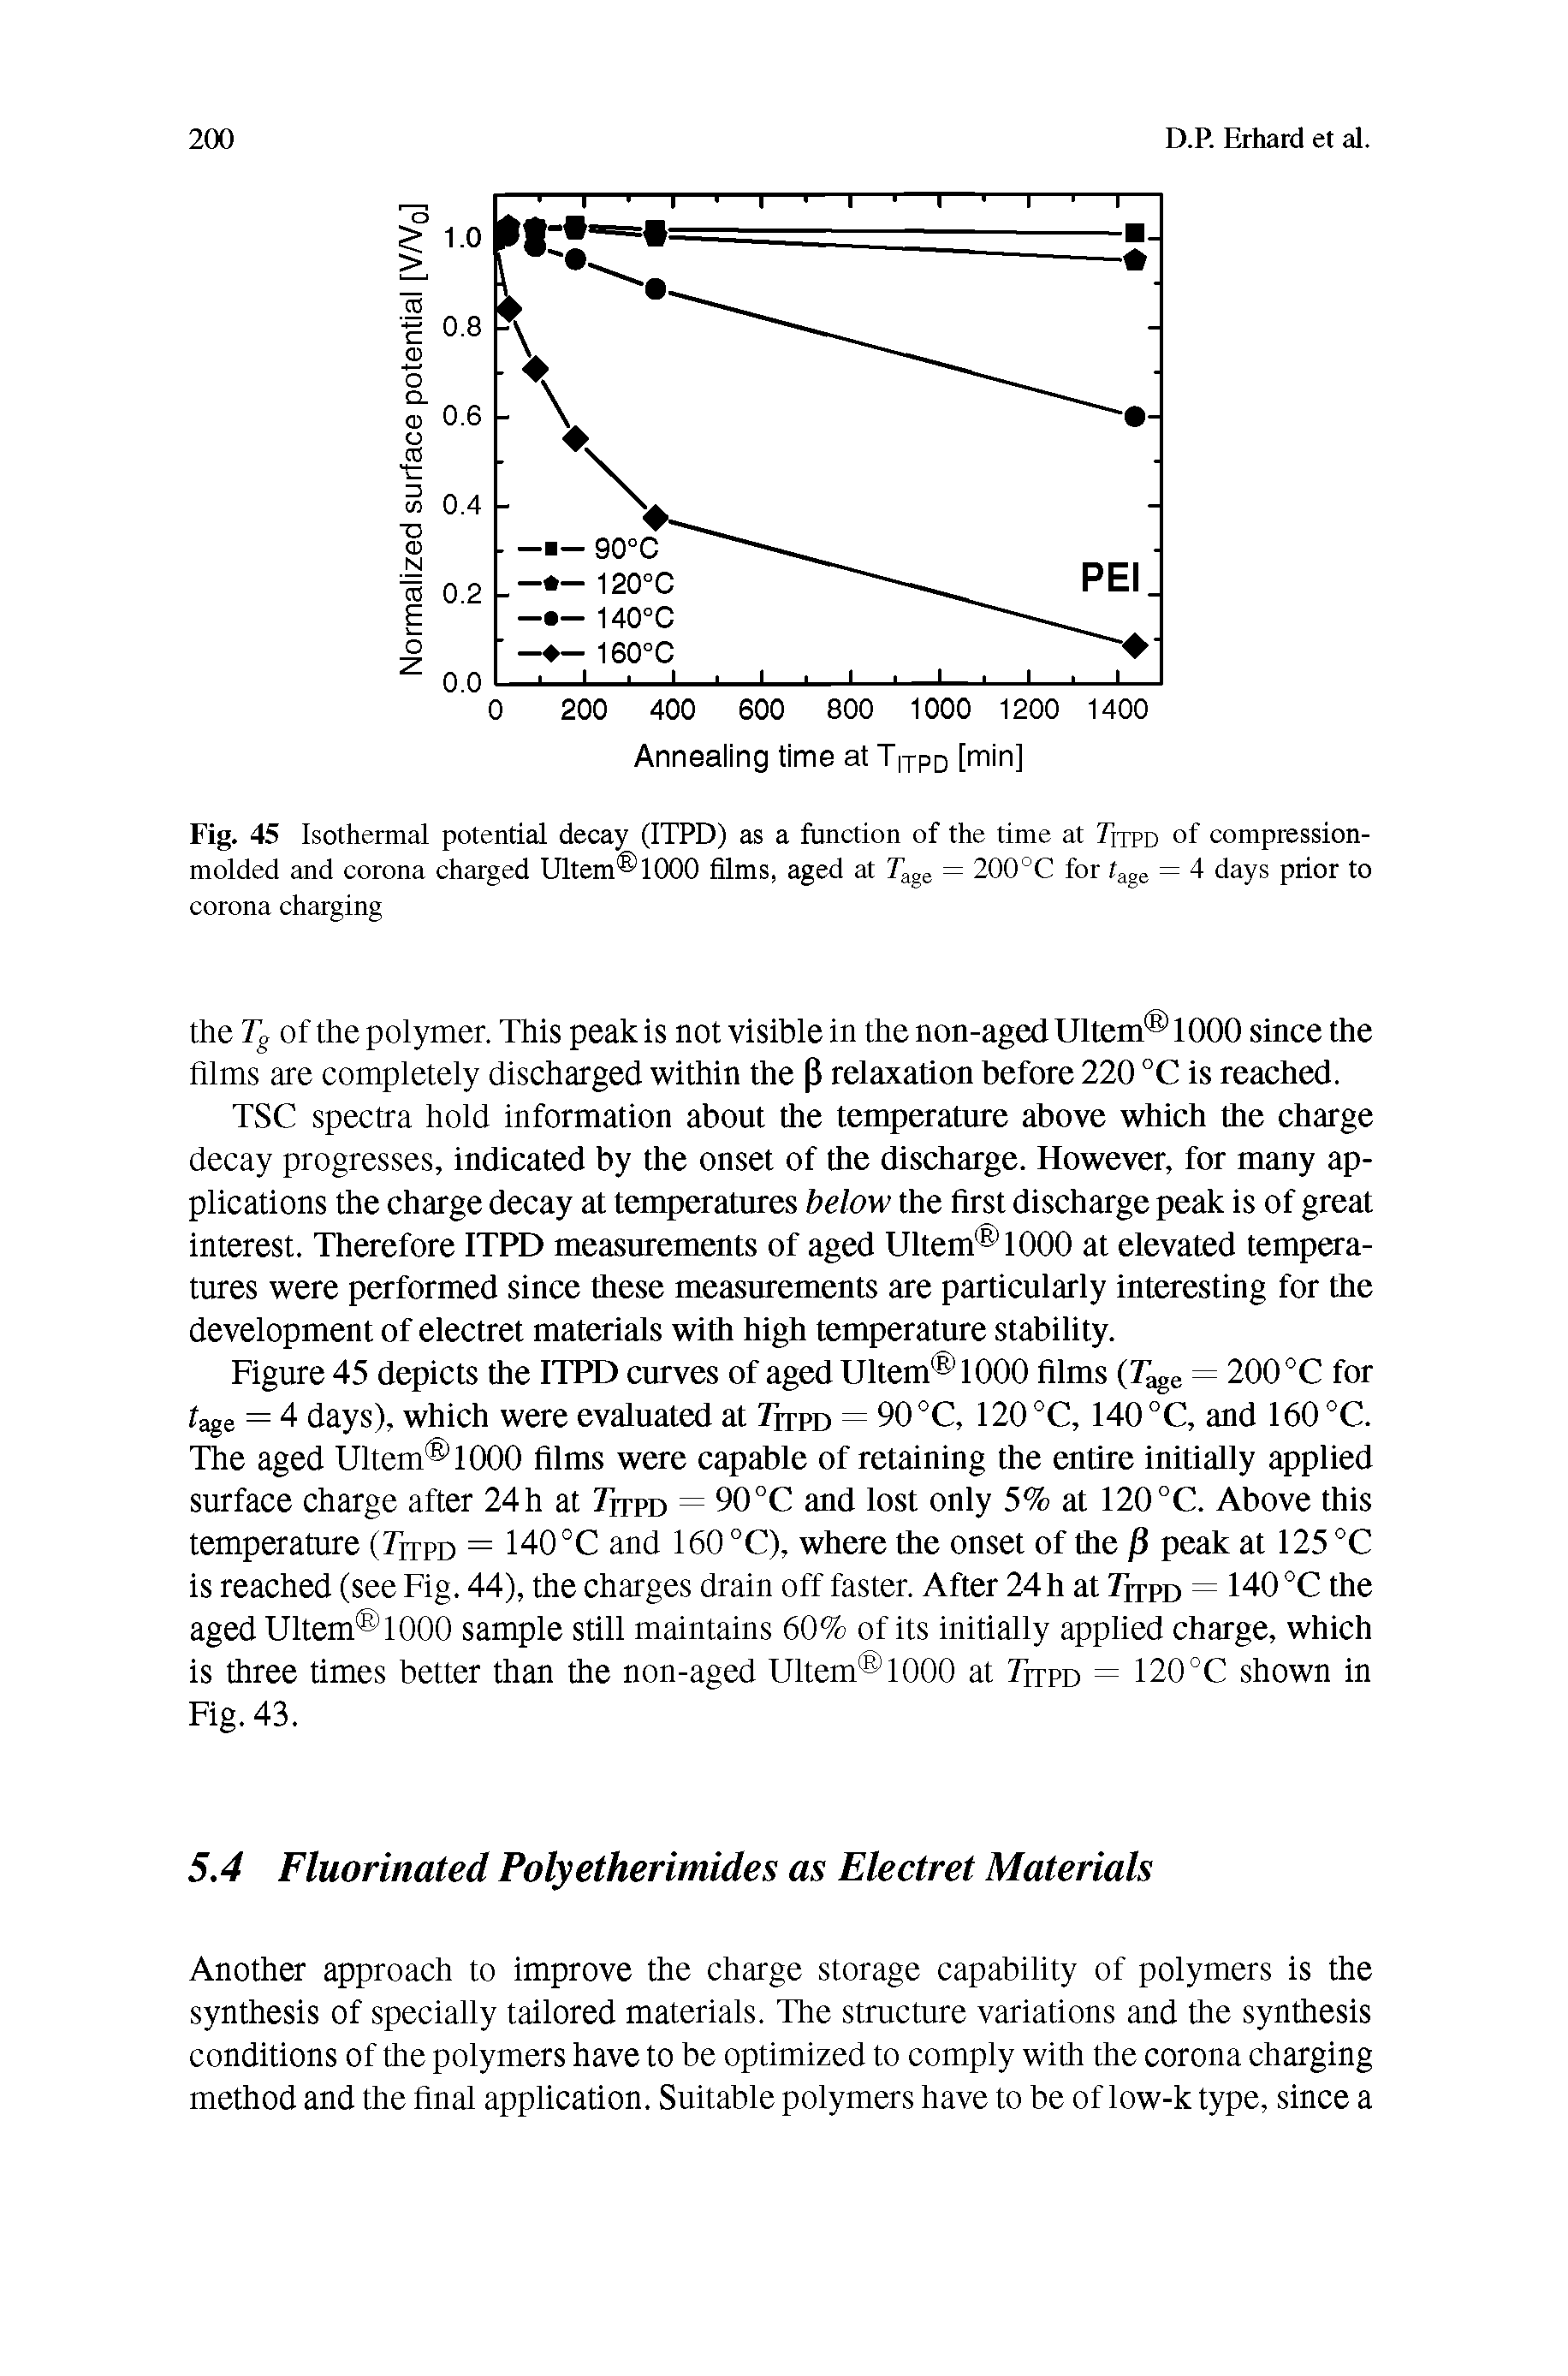 Fig. 45 Isothermal potential decay (ITPD) as a function of the time at Titpd of compression-molded and corona charged Ultem 1000 films, aged at rage = 200°C for tage = 4 days prior to corona charging...